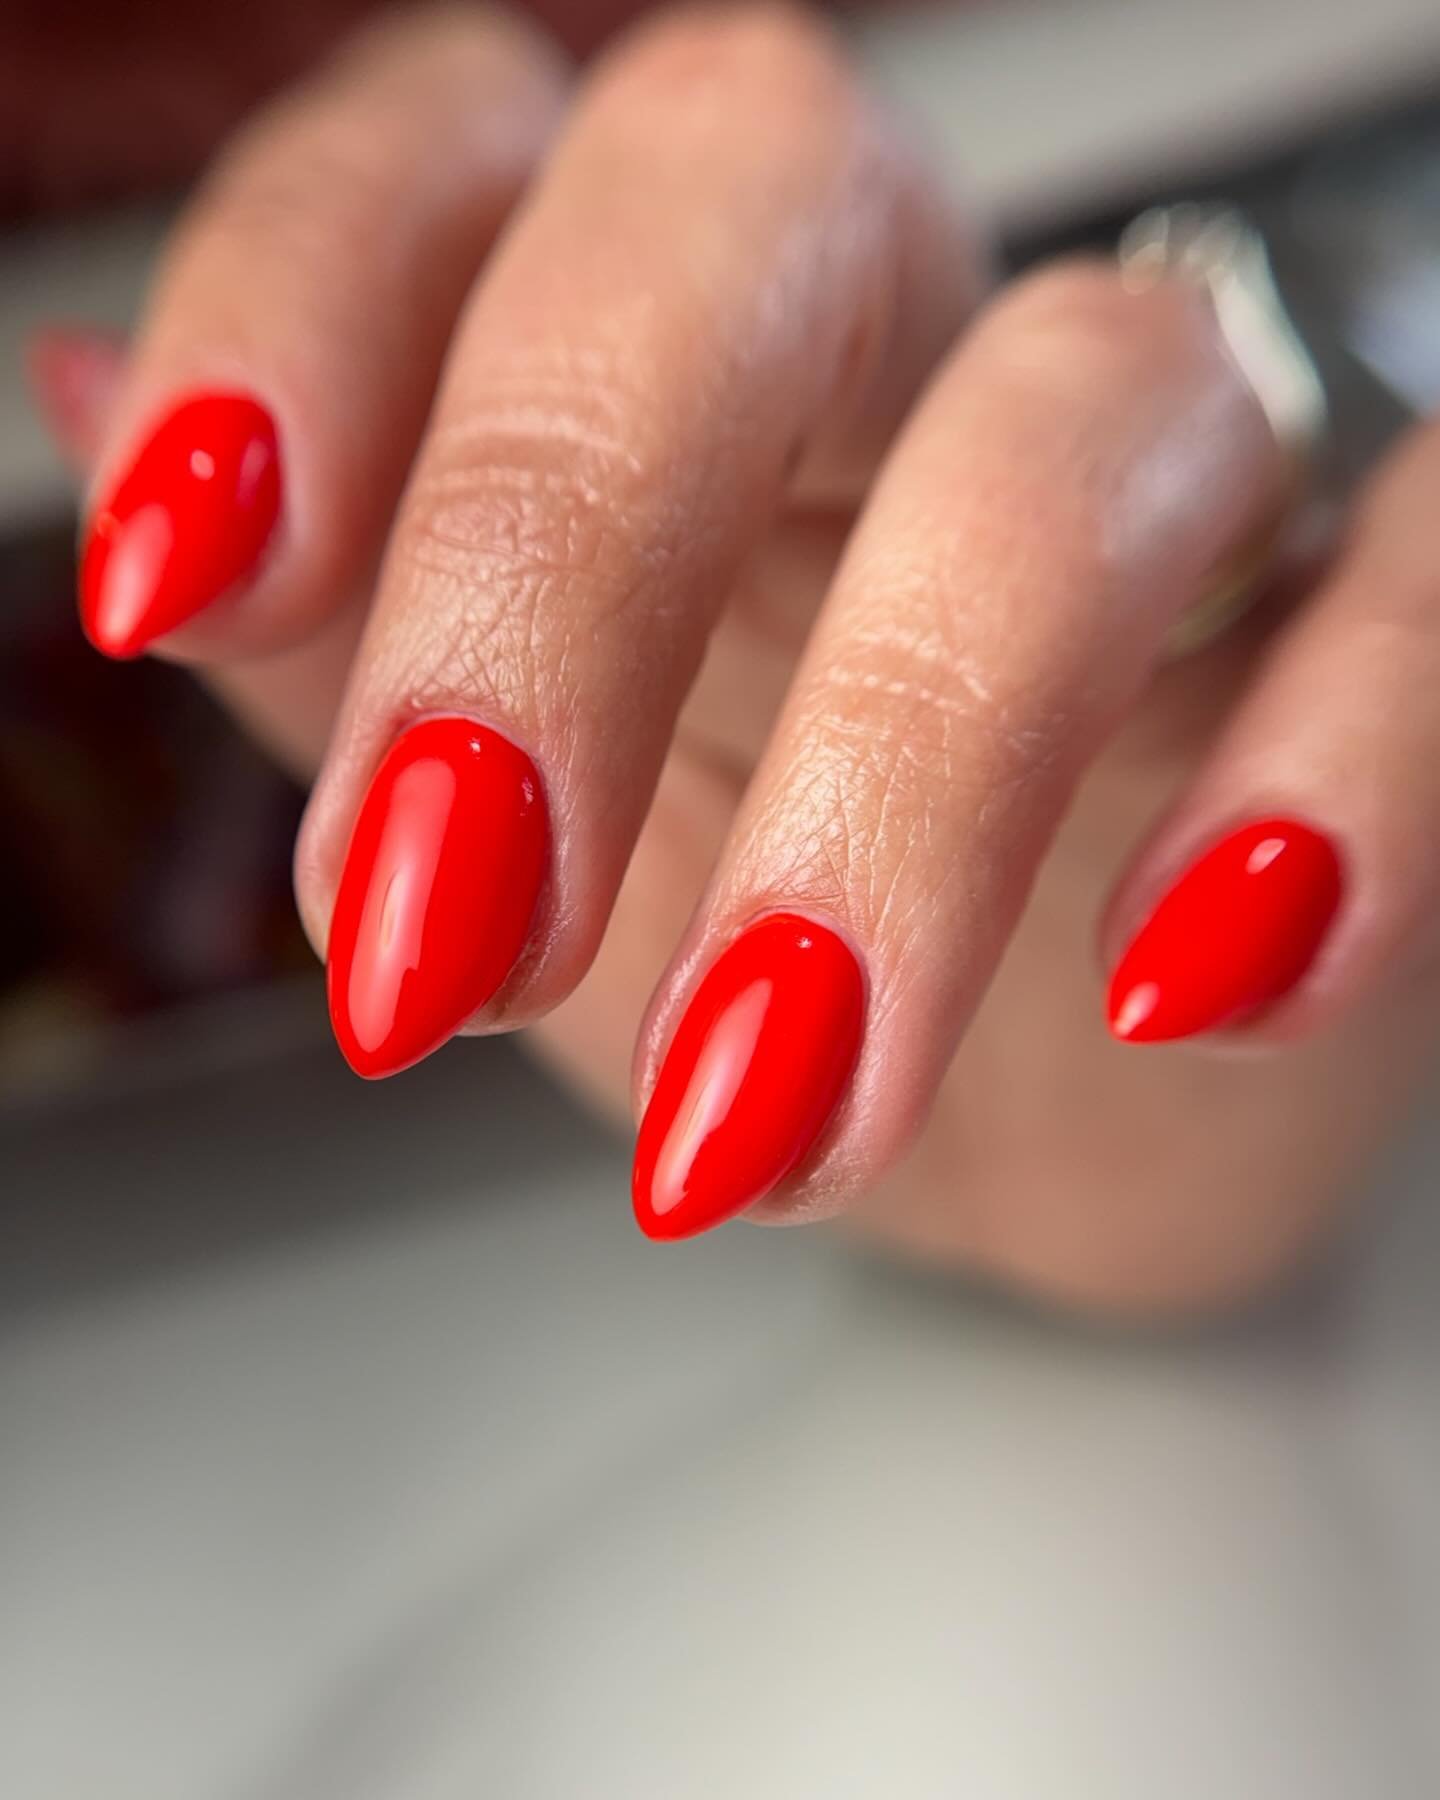 All hail Luxa Mai Tai 🤤🤤🤤 the PERFECT summer red! These nails are sure to be a hit as always. BRB going to order 5 more bottles 😂

Extra close up on the last slide 🤤😍
&bull;
&bull;
&bull;
#nails #utahnails #utahnailtech #ogdennails #ogdennailte